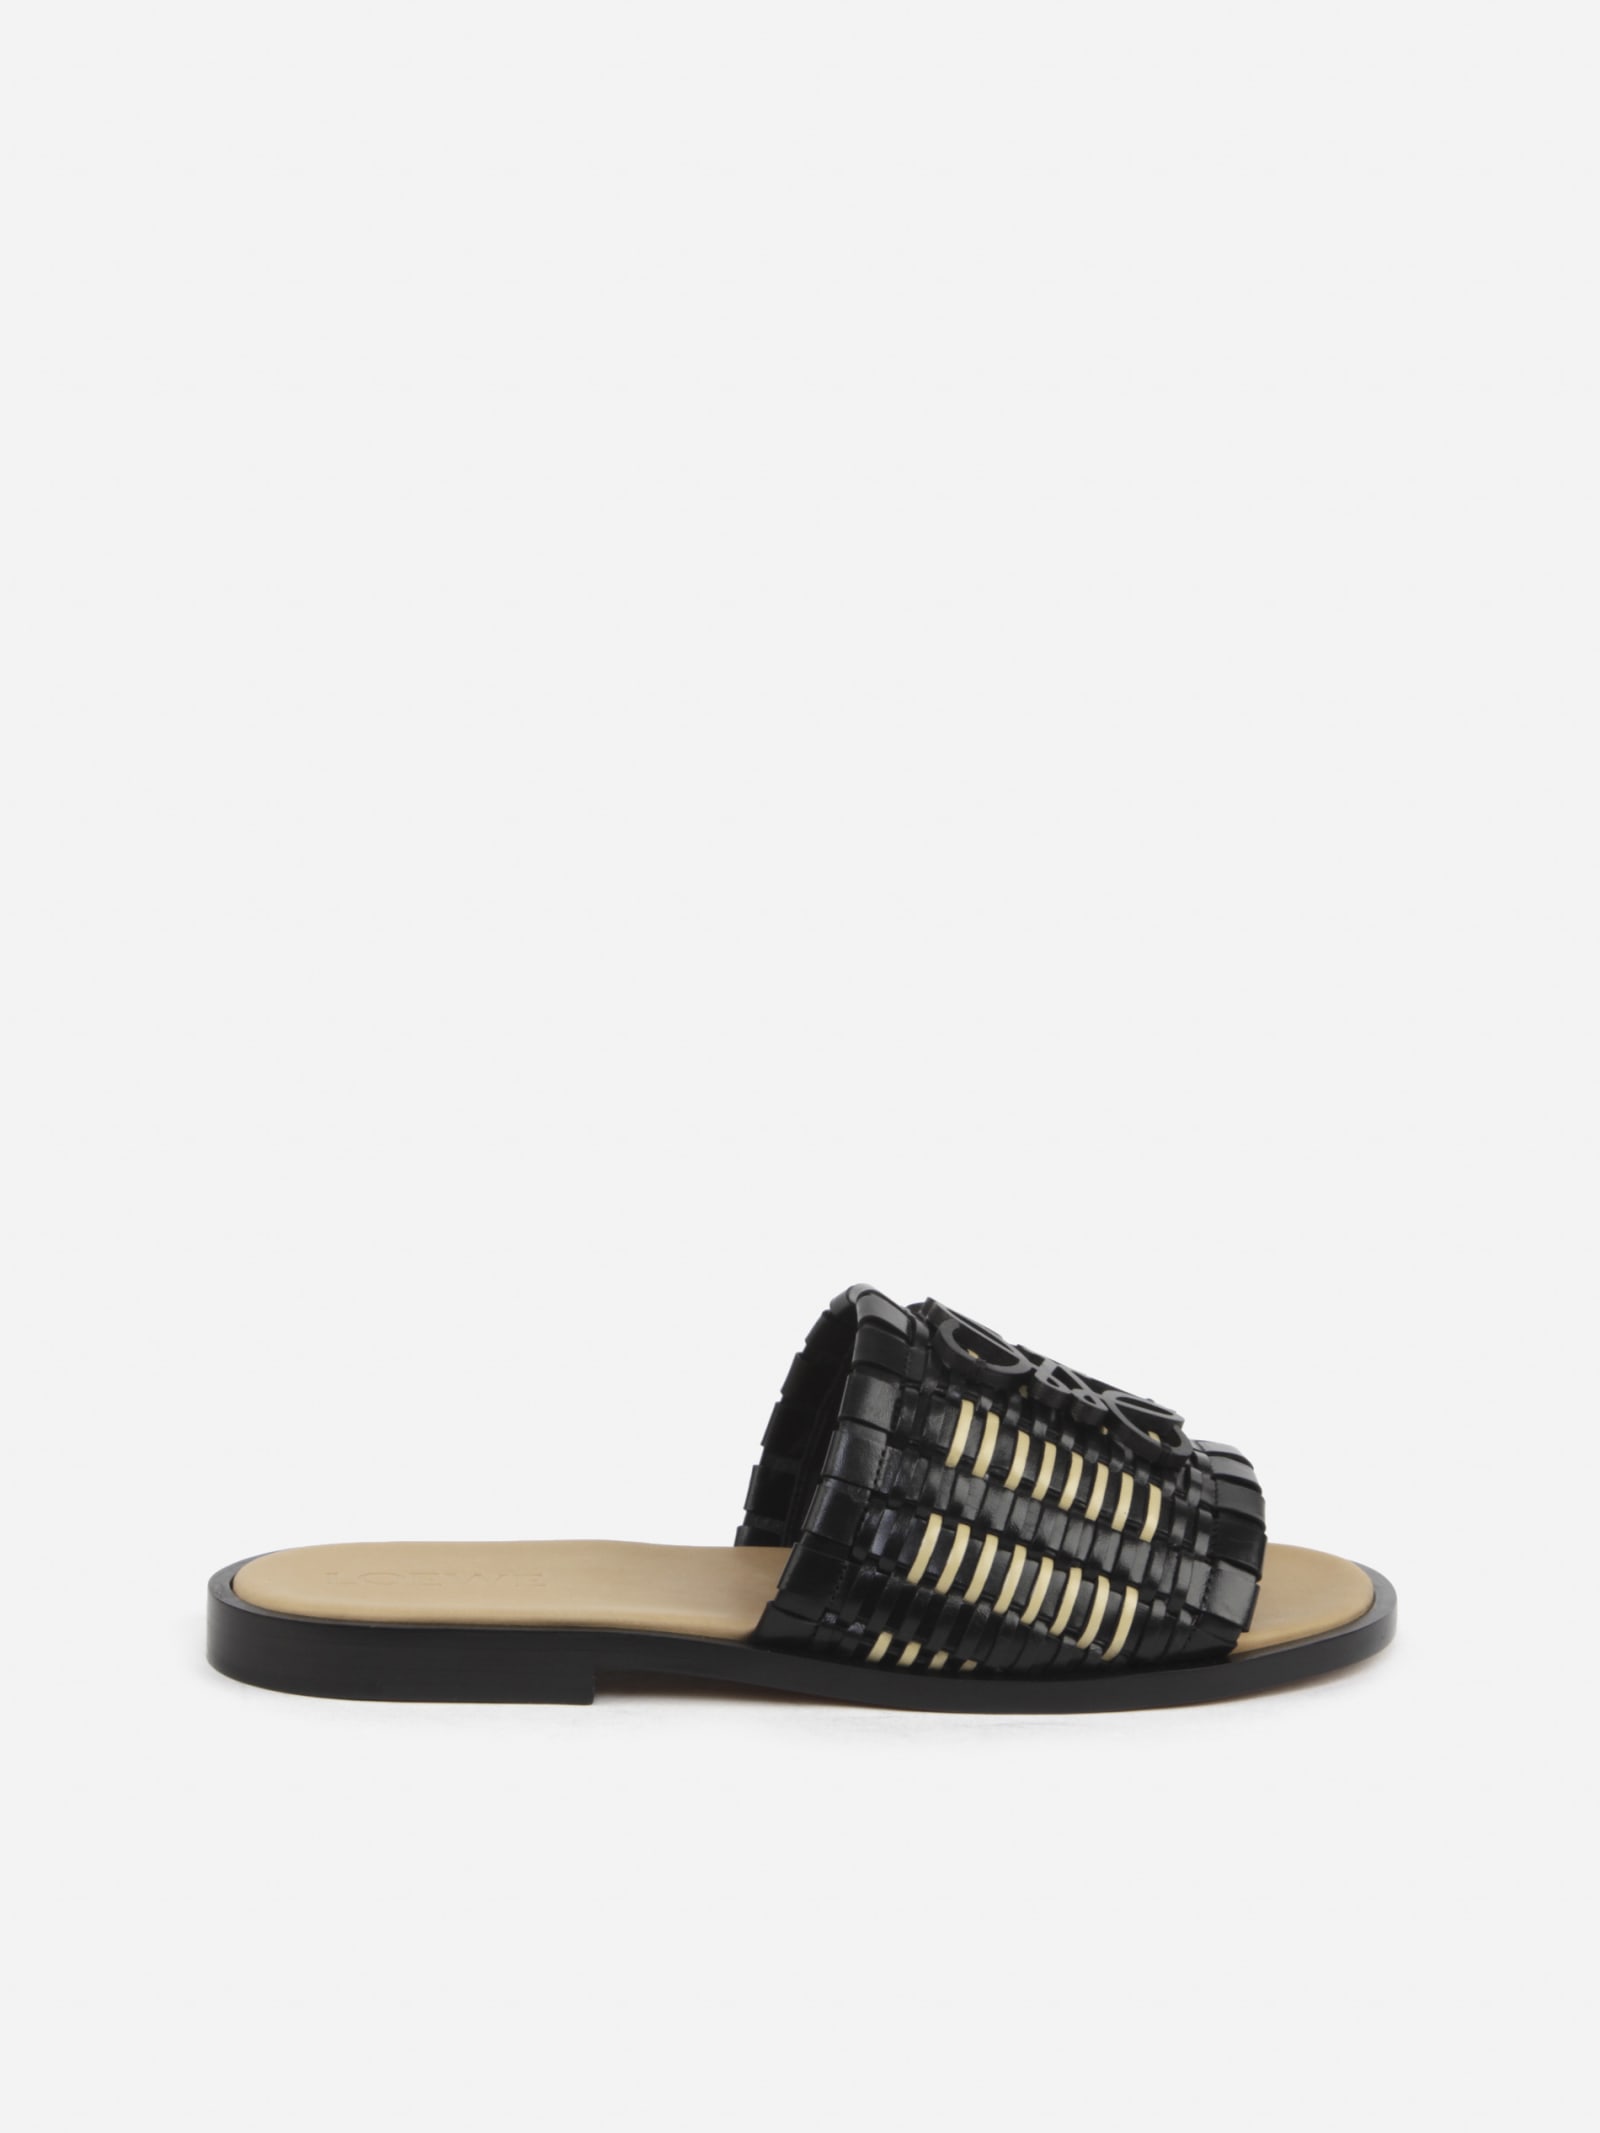 LOEWE SLIDES SANDALS MADE OF WOVEN LEATHER WITH ANAGRAM,L814465X04 ANAGRAM1208